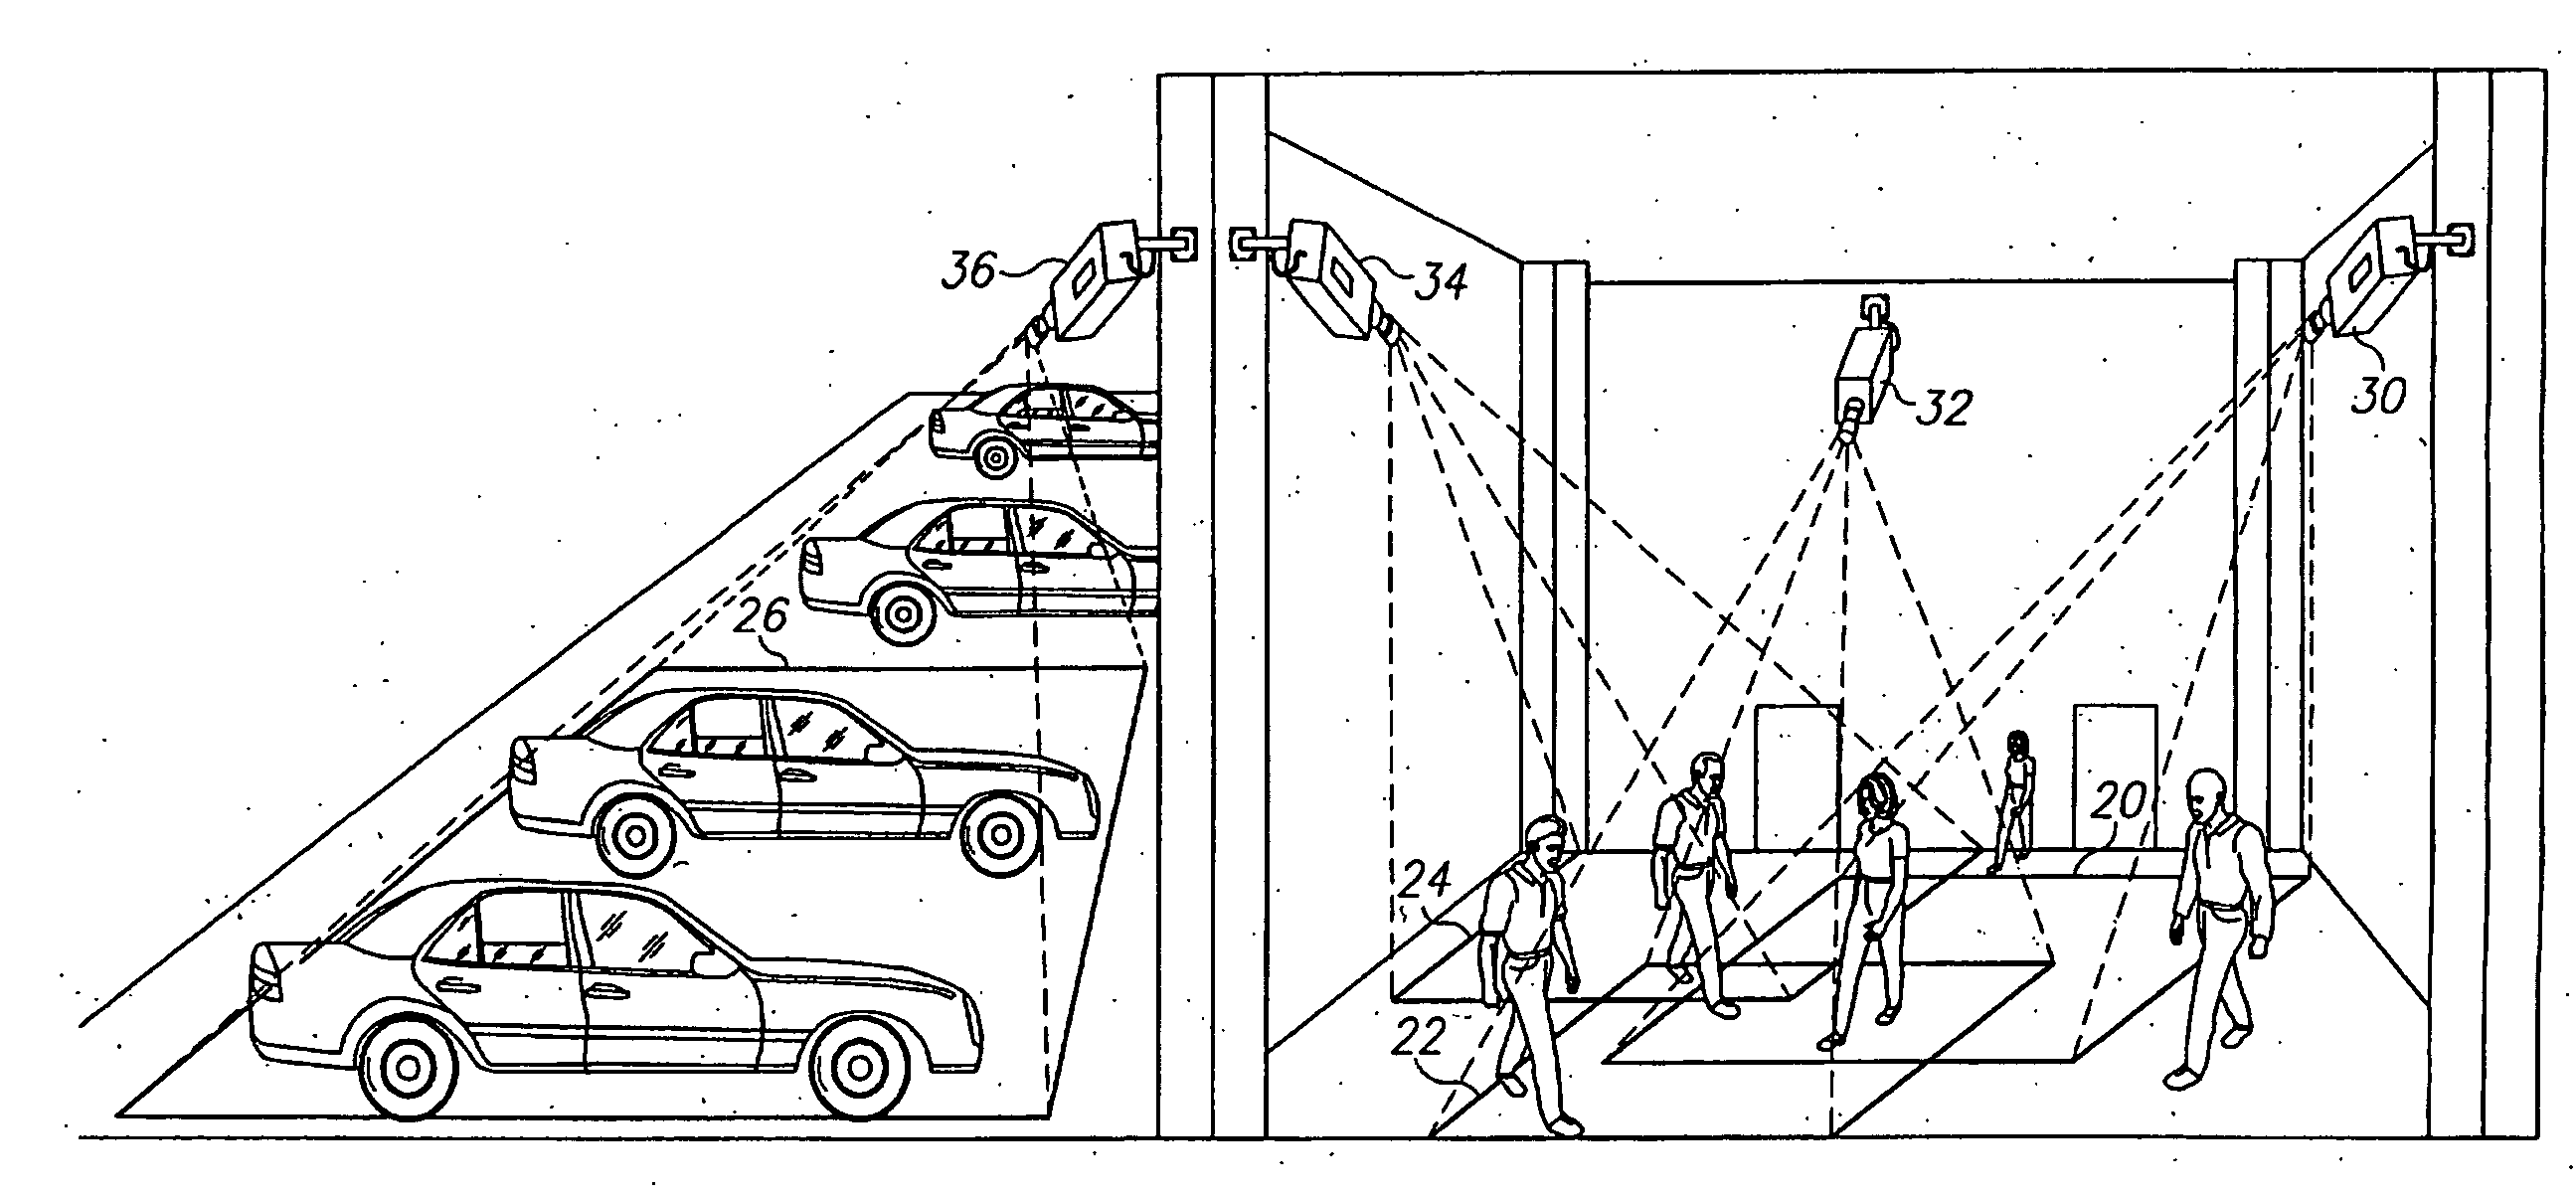 Apparatus And Methods For The Semi-Automatic Tracking And Examining Of An Object Or An Event In A Monitored Site